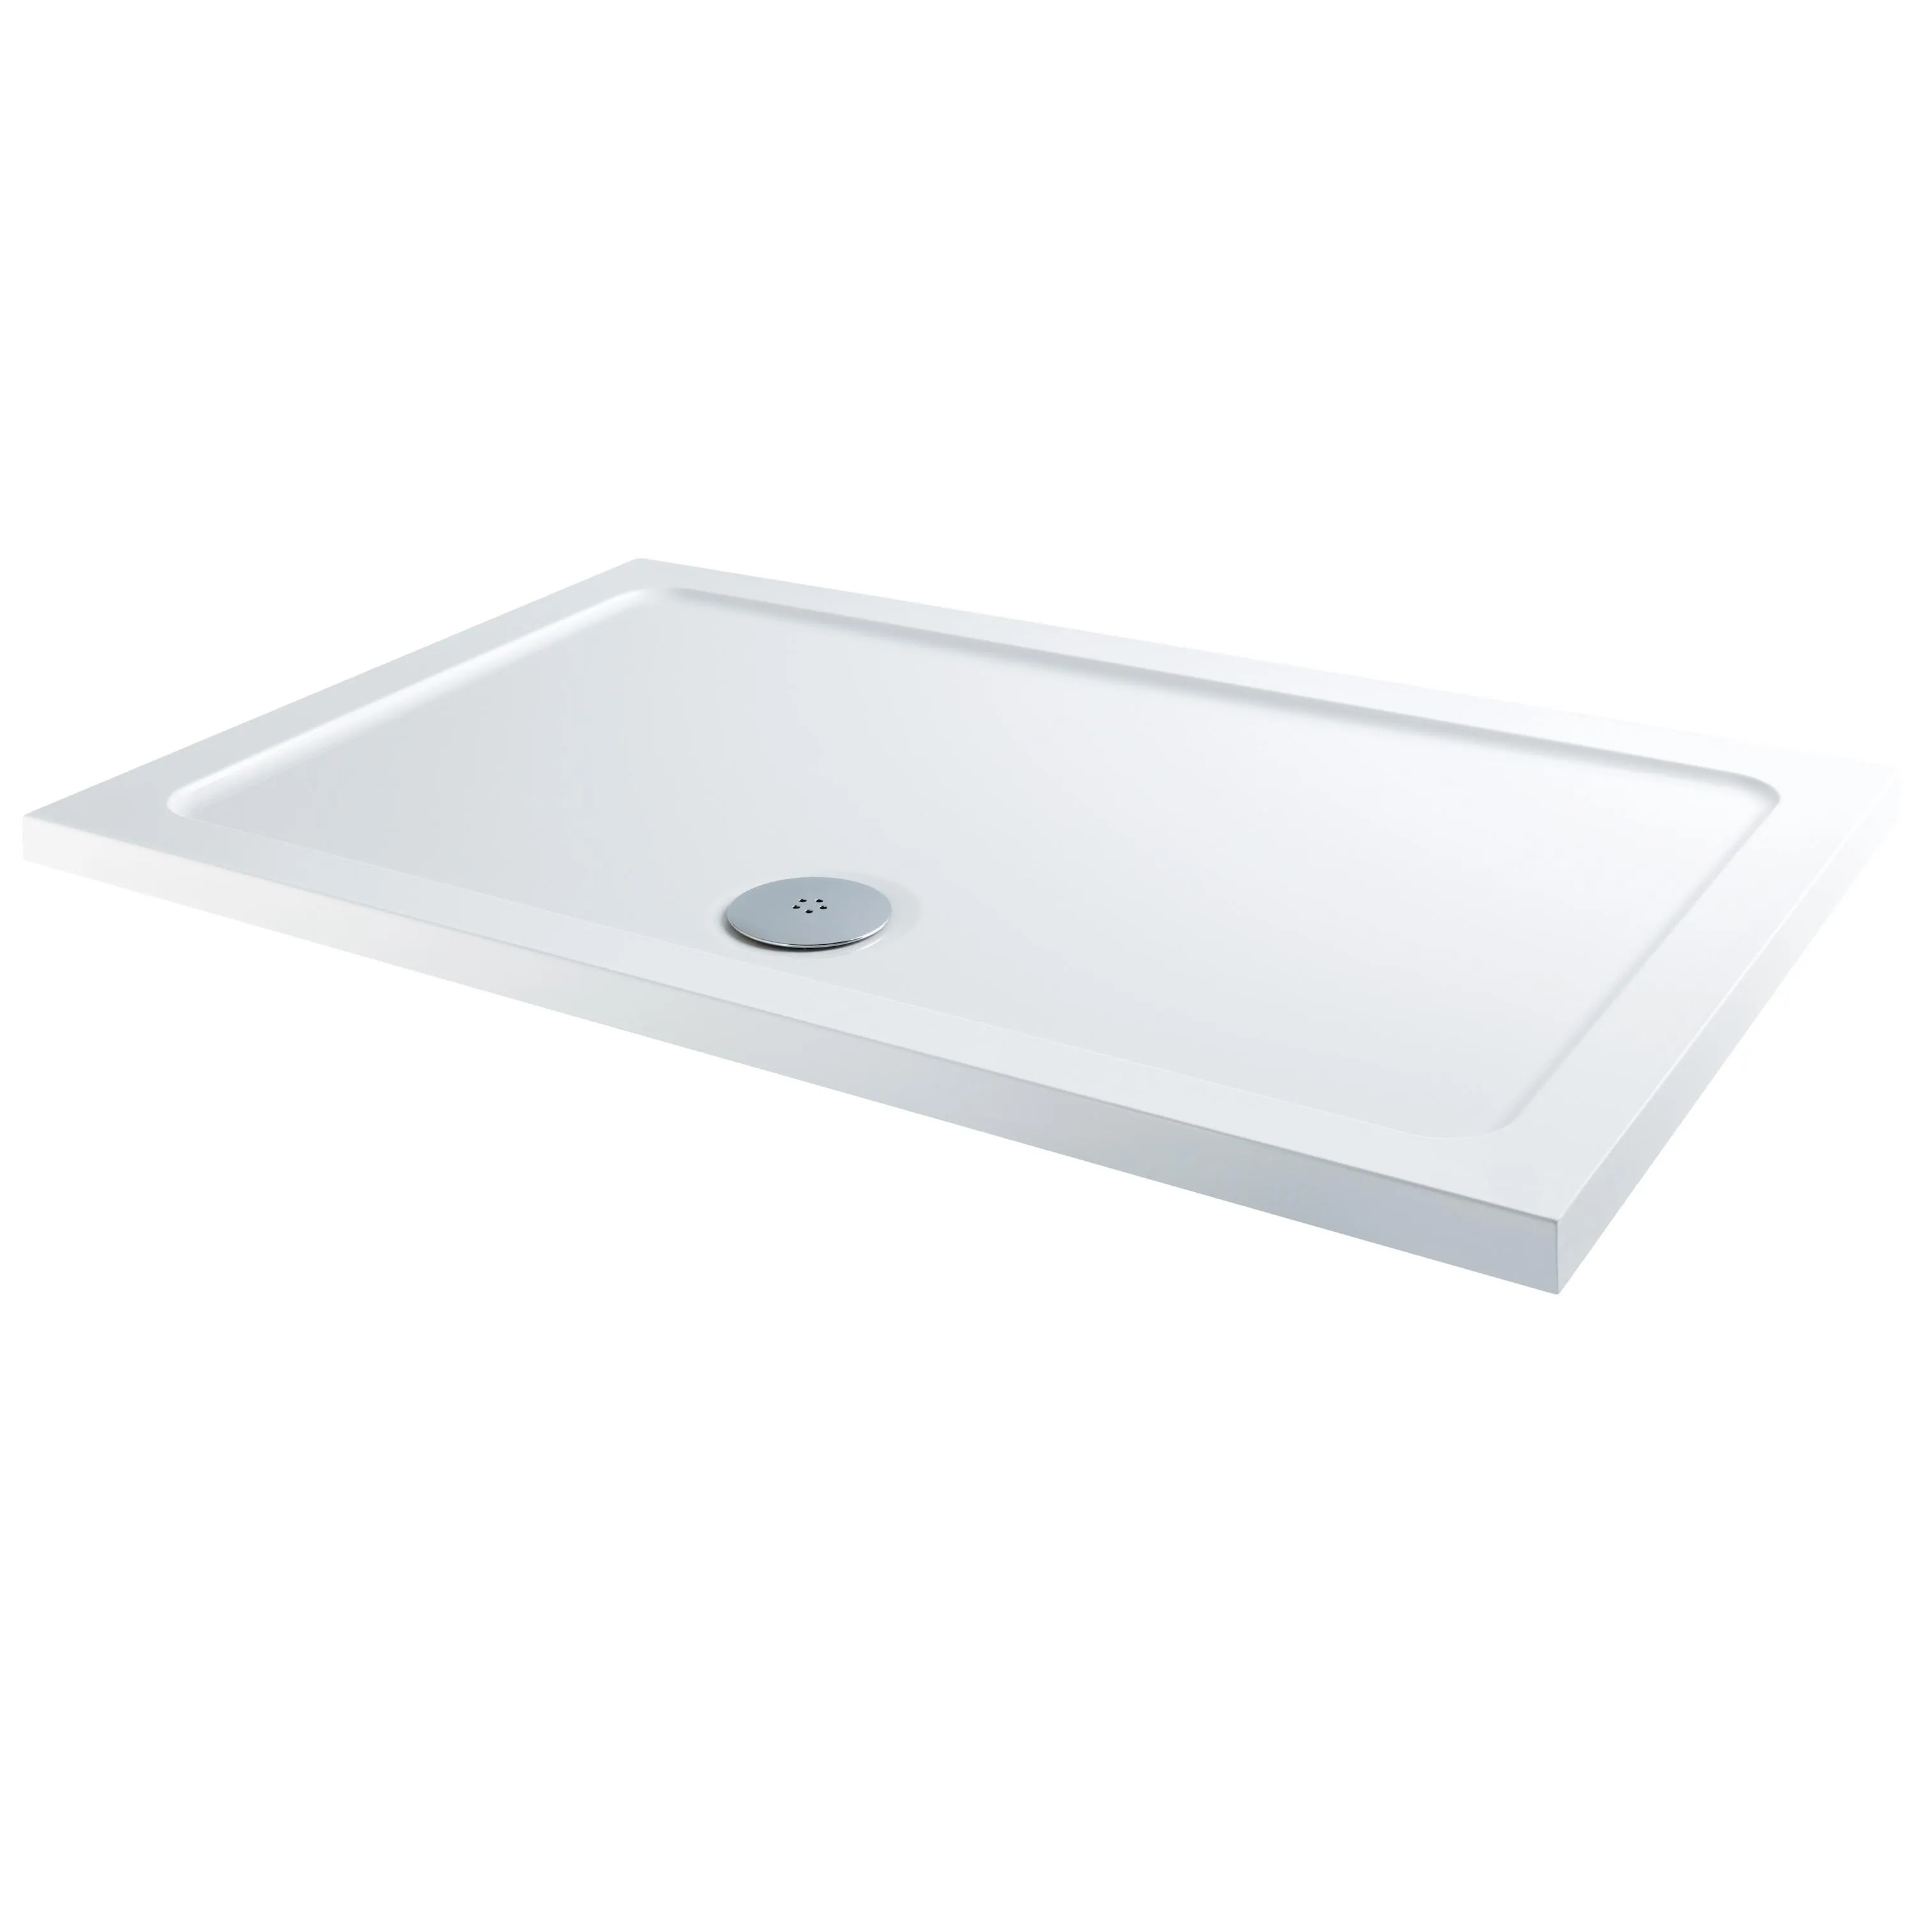 Hydrolux Low Profile Rectangular Shower Tray 1700 x 800mm with Waste